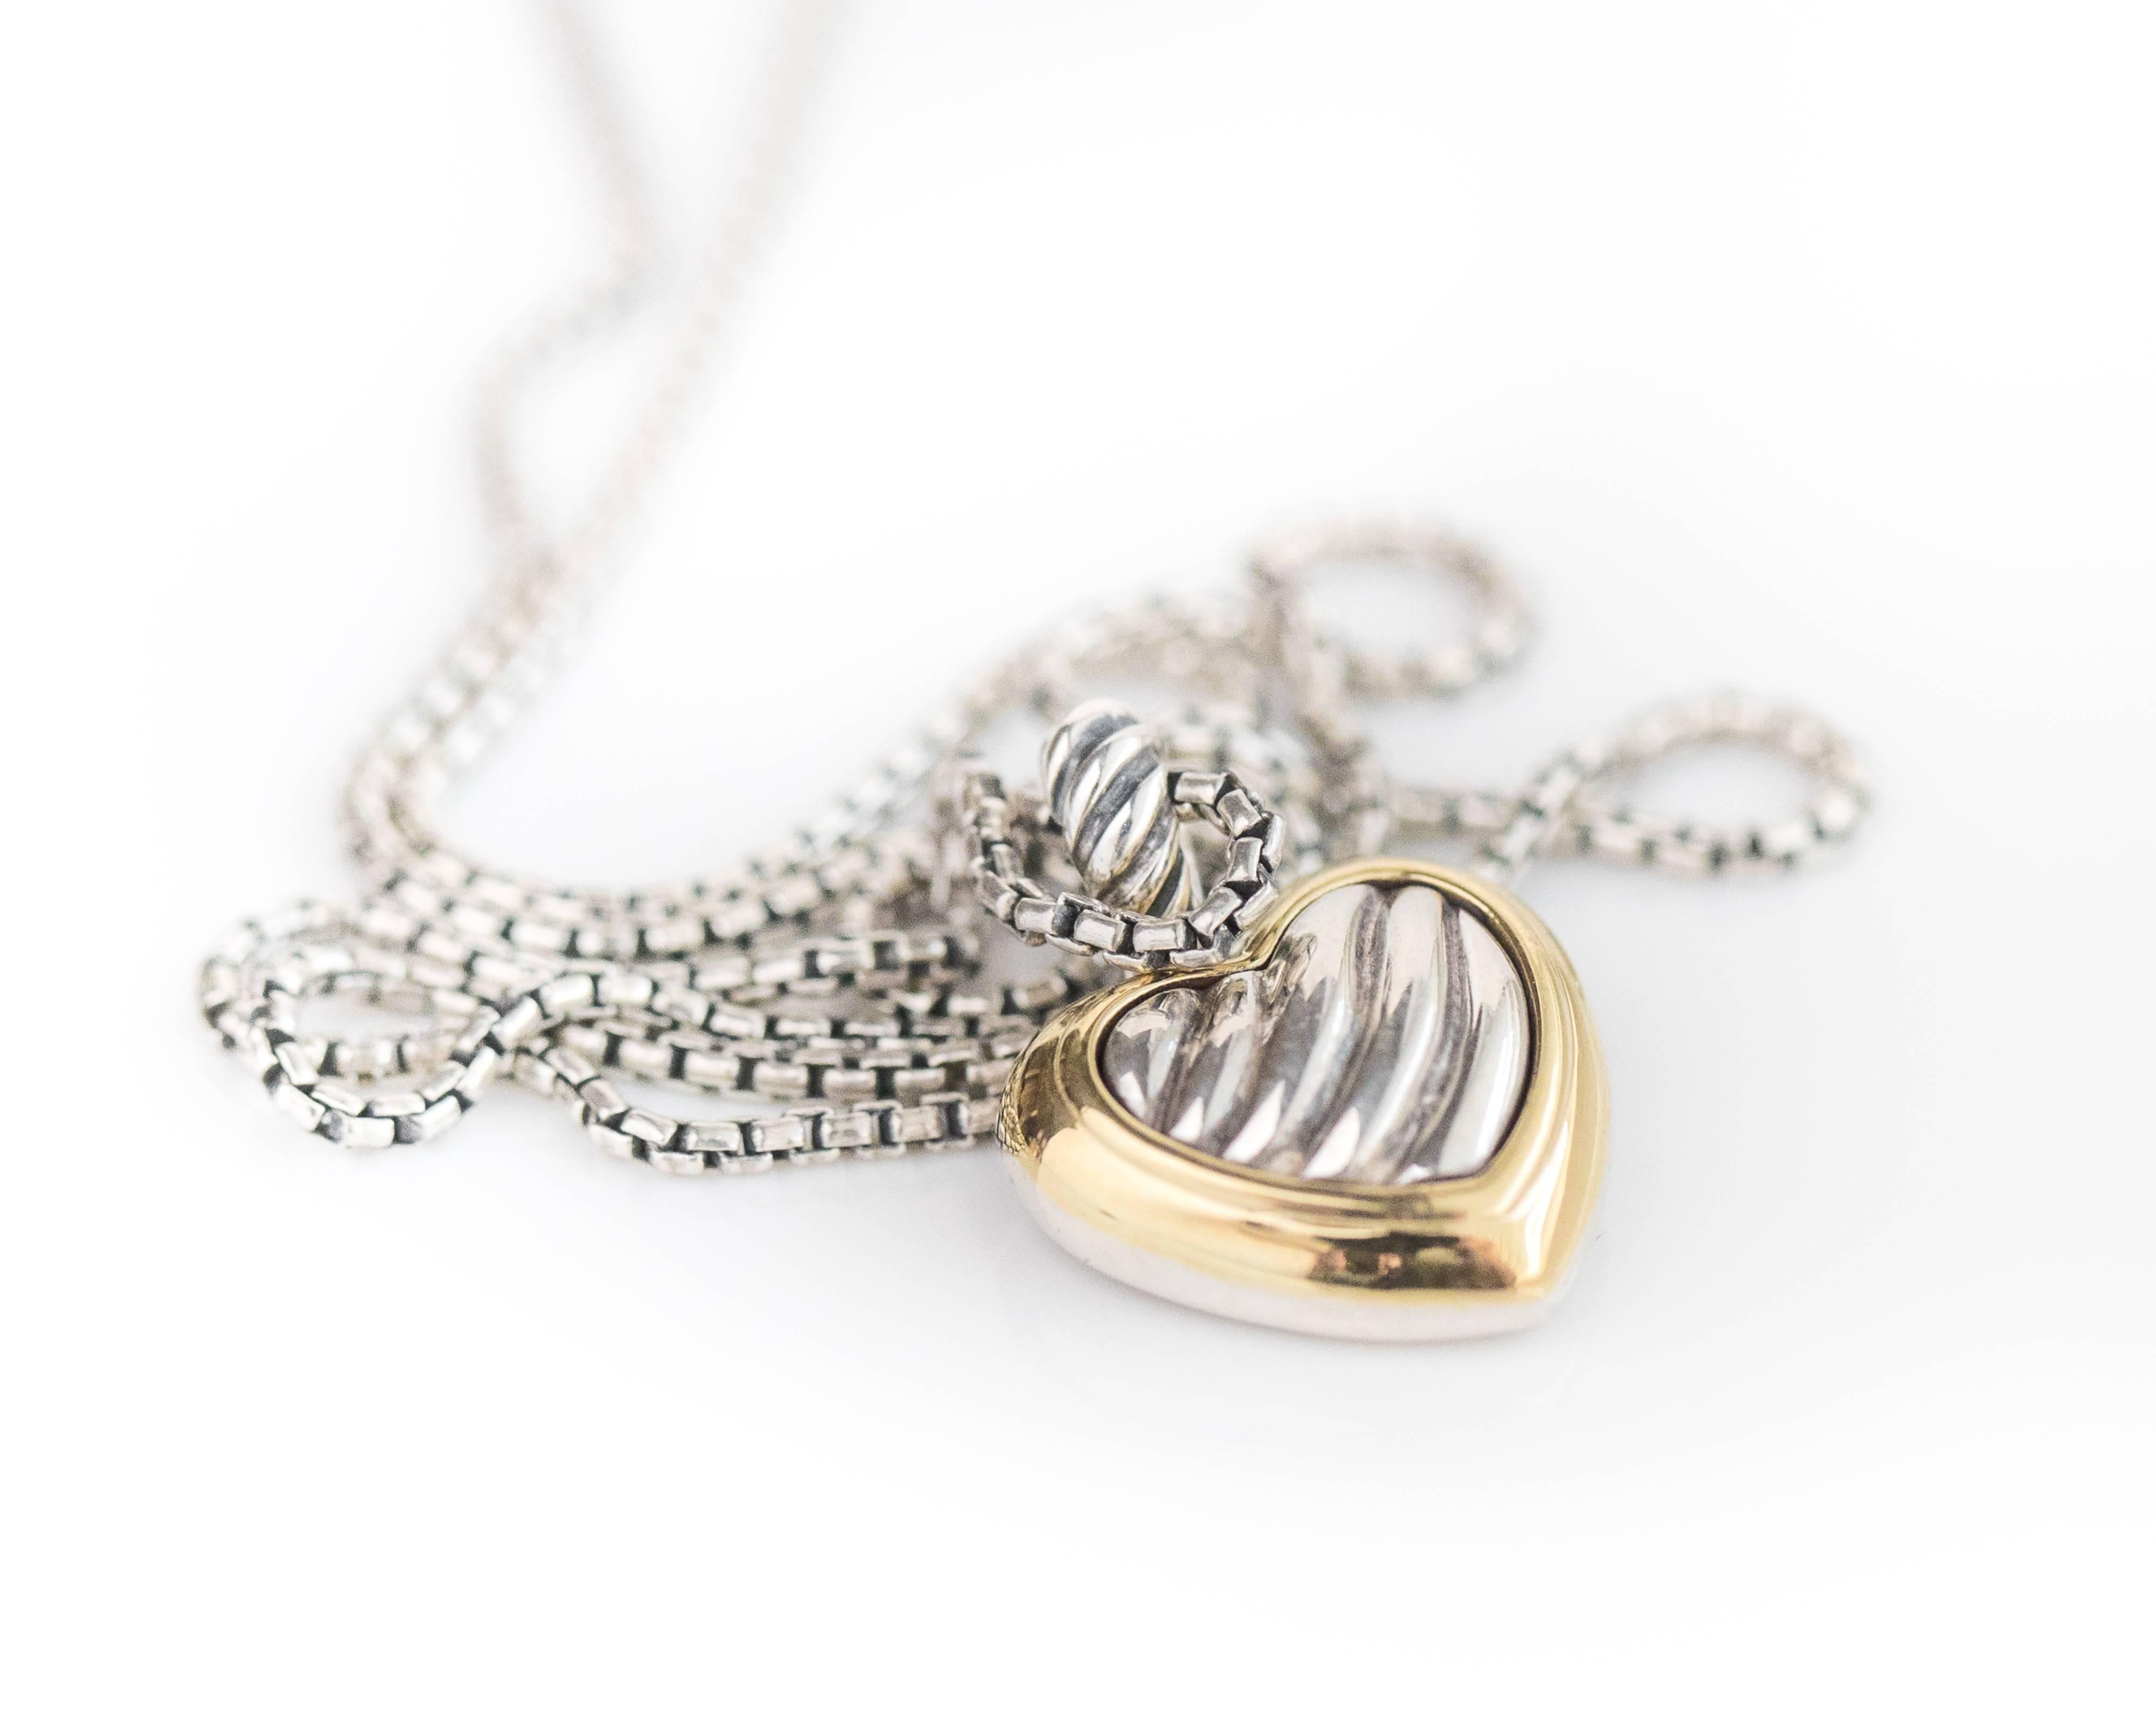 2005 David Yurman Cable Heart Pendant Necklace features a sterling silver cable heart framed in 18 karat yellow gold. The puffed-front heart pendant is suspended by a cable bail on a 1 millimeter mini box chain with Lobster Claw clasp. The necklace